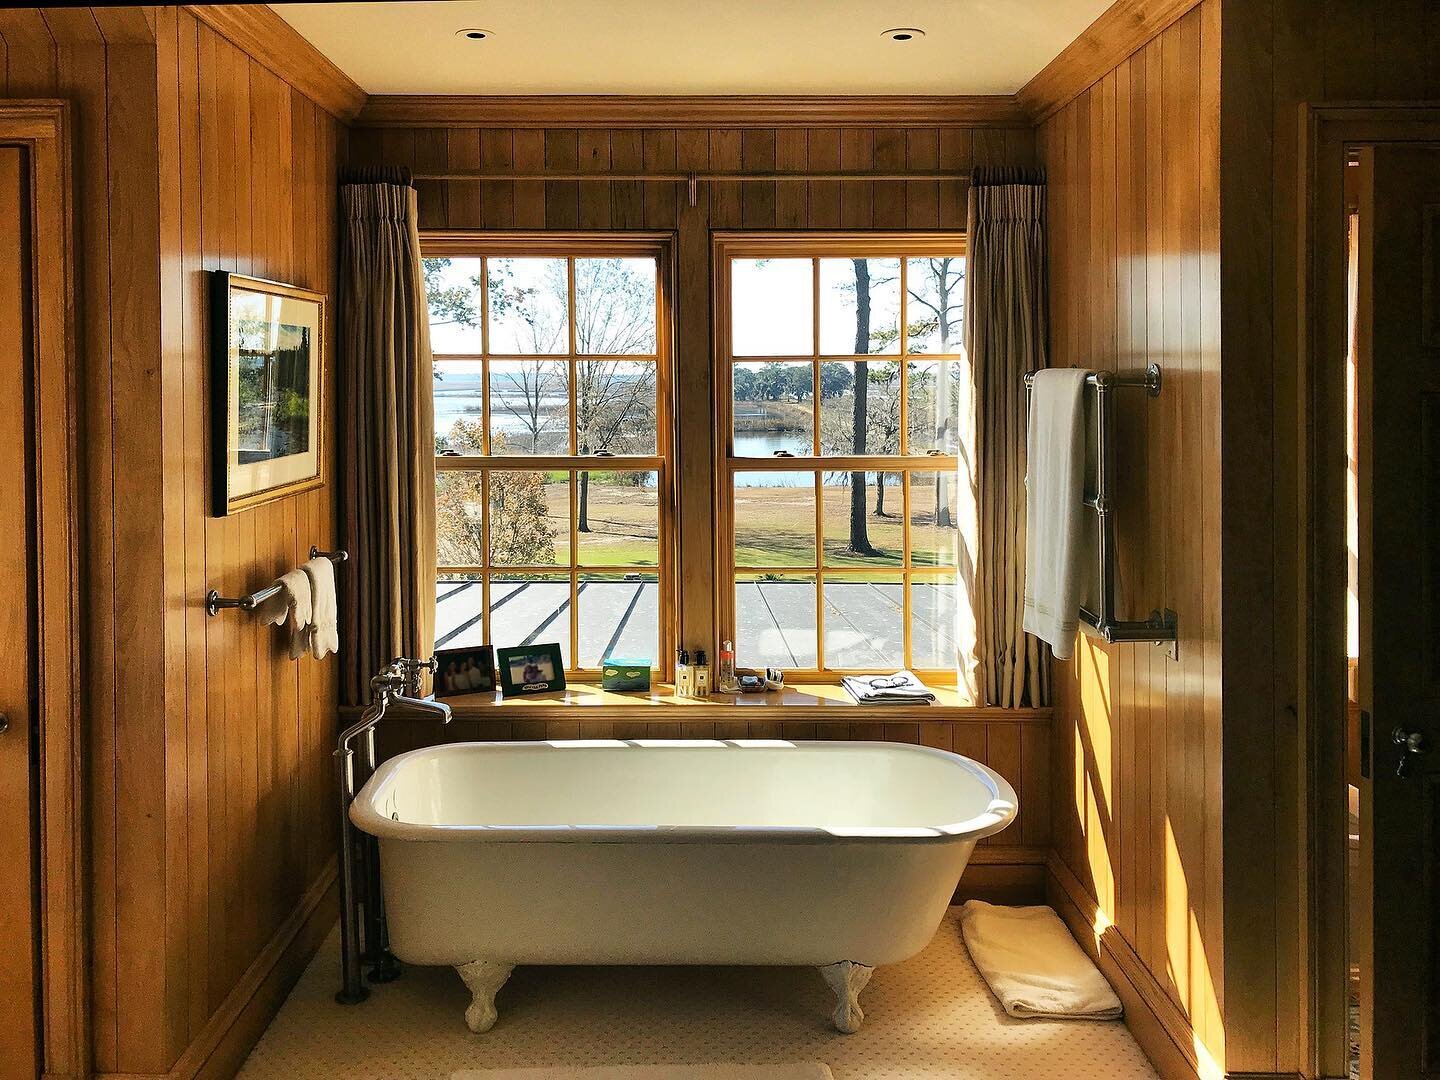 Beautiful natural light warmly floods this bathroom, paneled and trimmed in custom milled Hickory made in our Cabinetry and Millwork Workshop, with a six foot antique cast iron tub perfect placed to take in the incredible scenery. 
.
.
.
#beautifulba